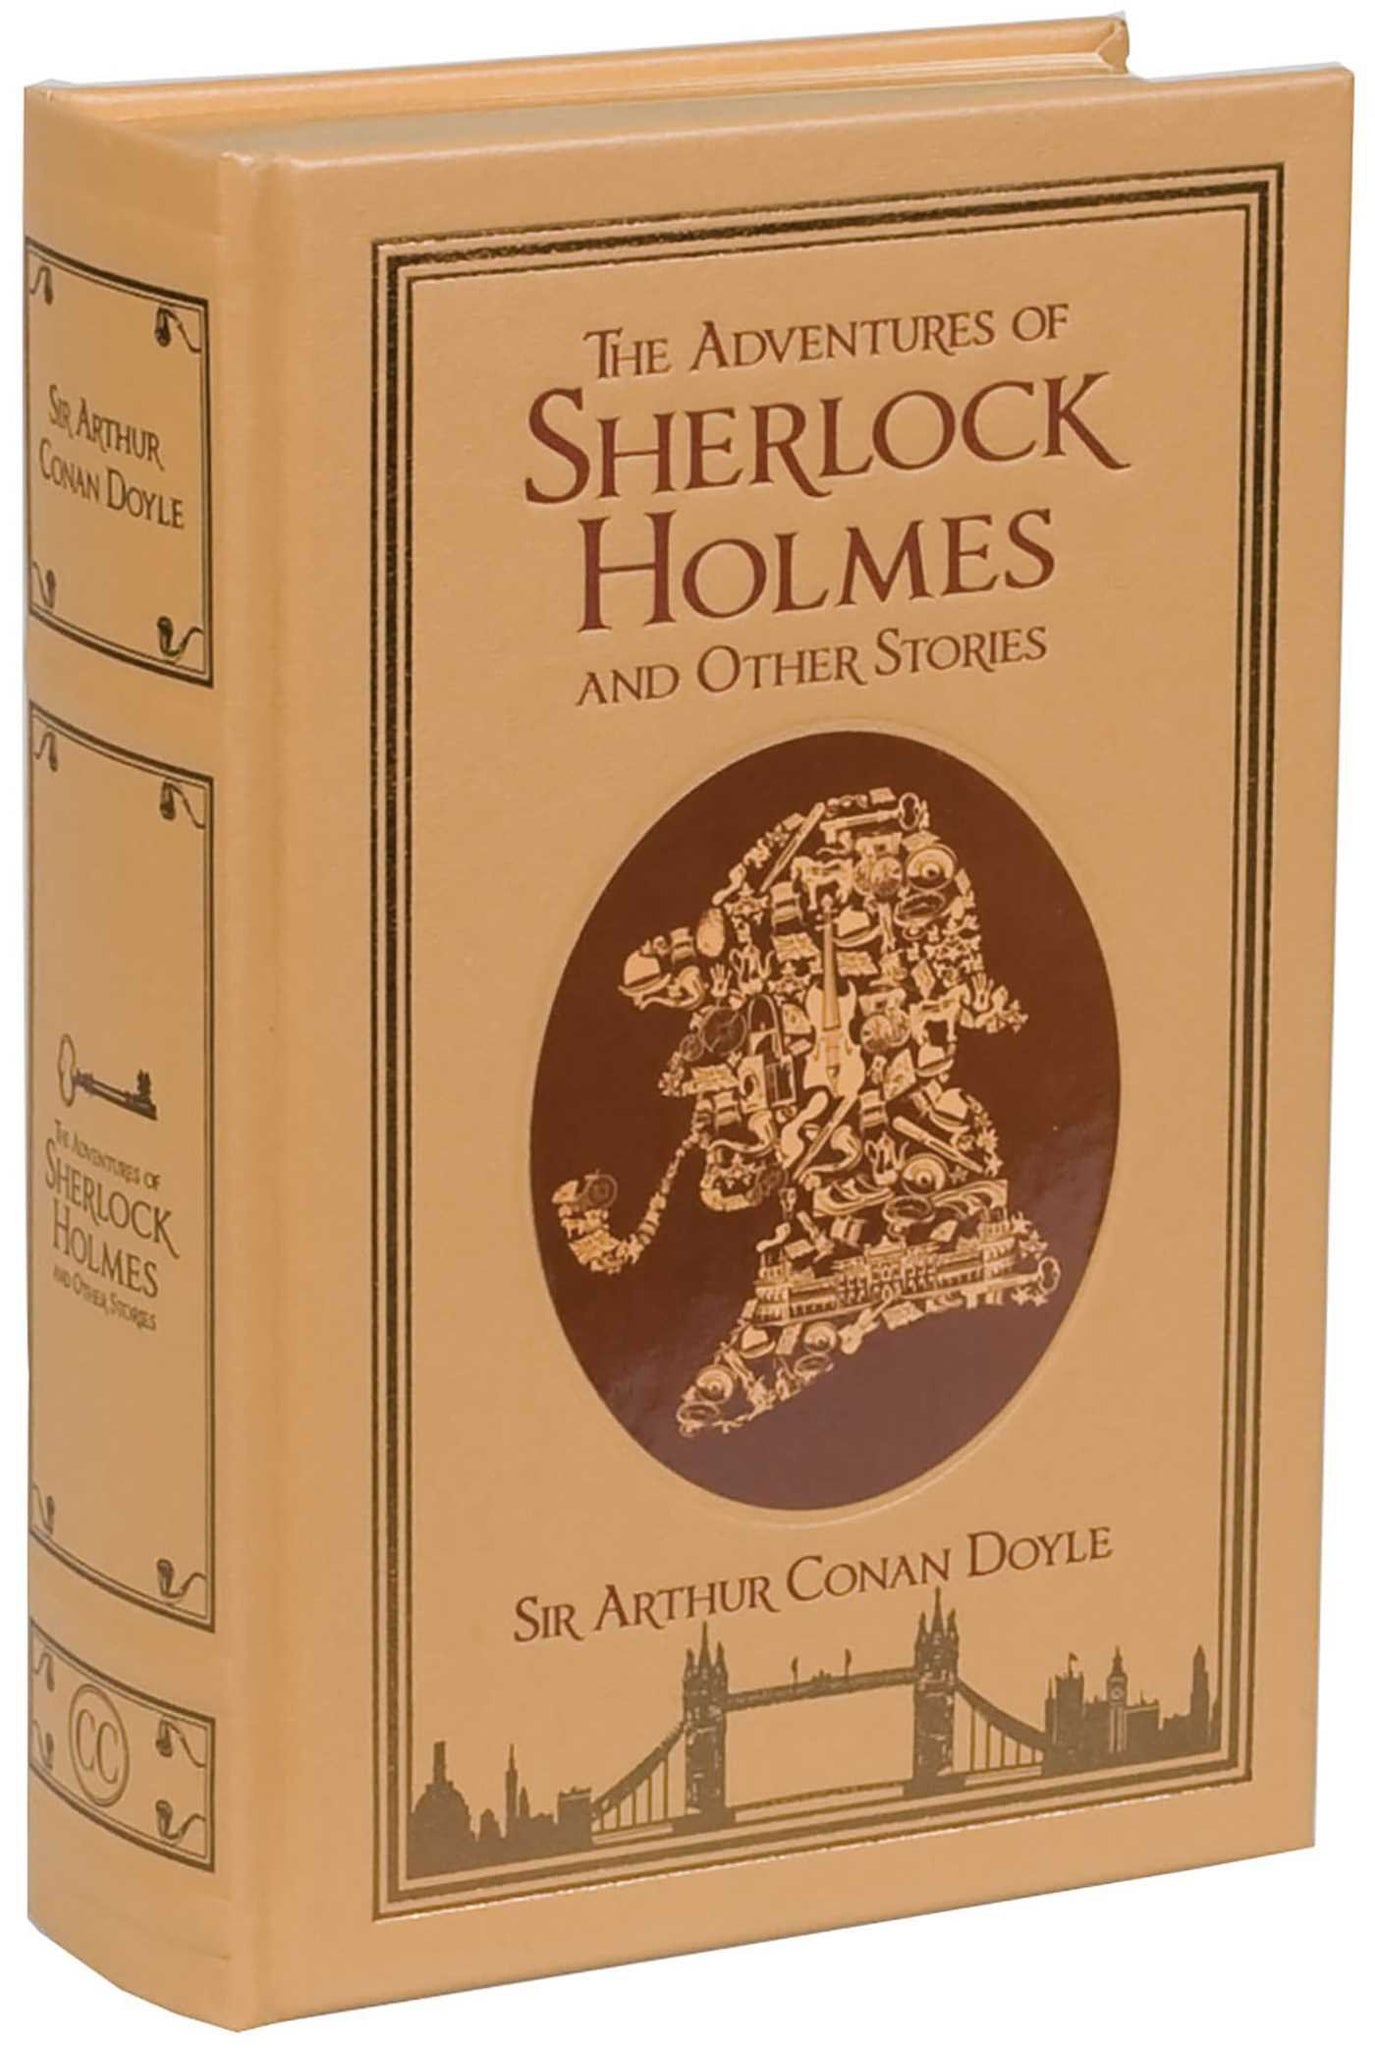 The Adventures of Sherlock Holmes, and Other Stories #978-160710-211-3